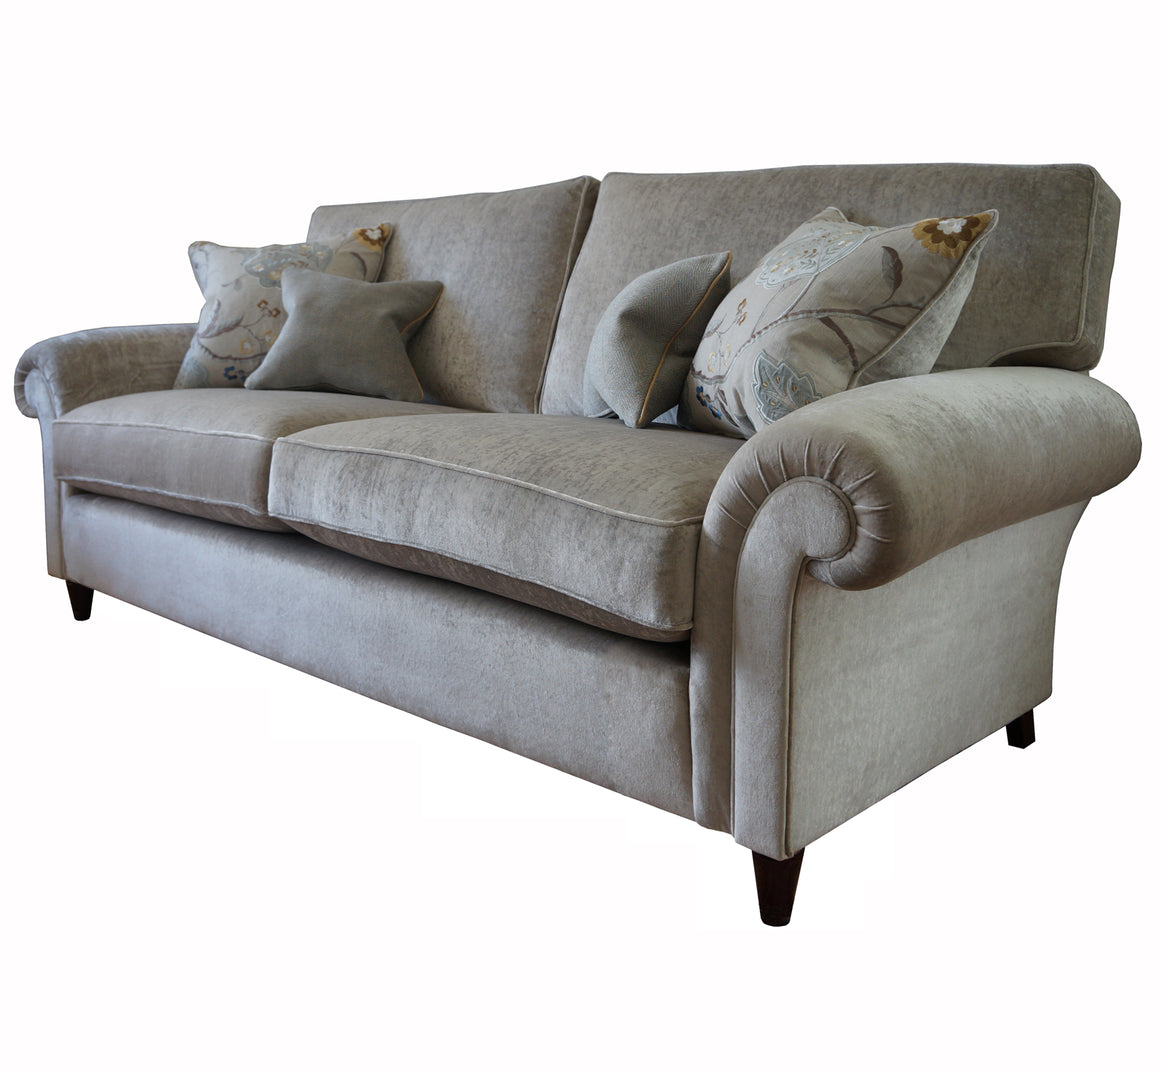 Walton Sofas and chairs in Linwood Alpha HALF PRICE TO ORDER